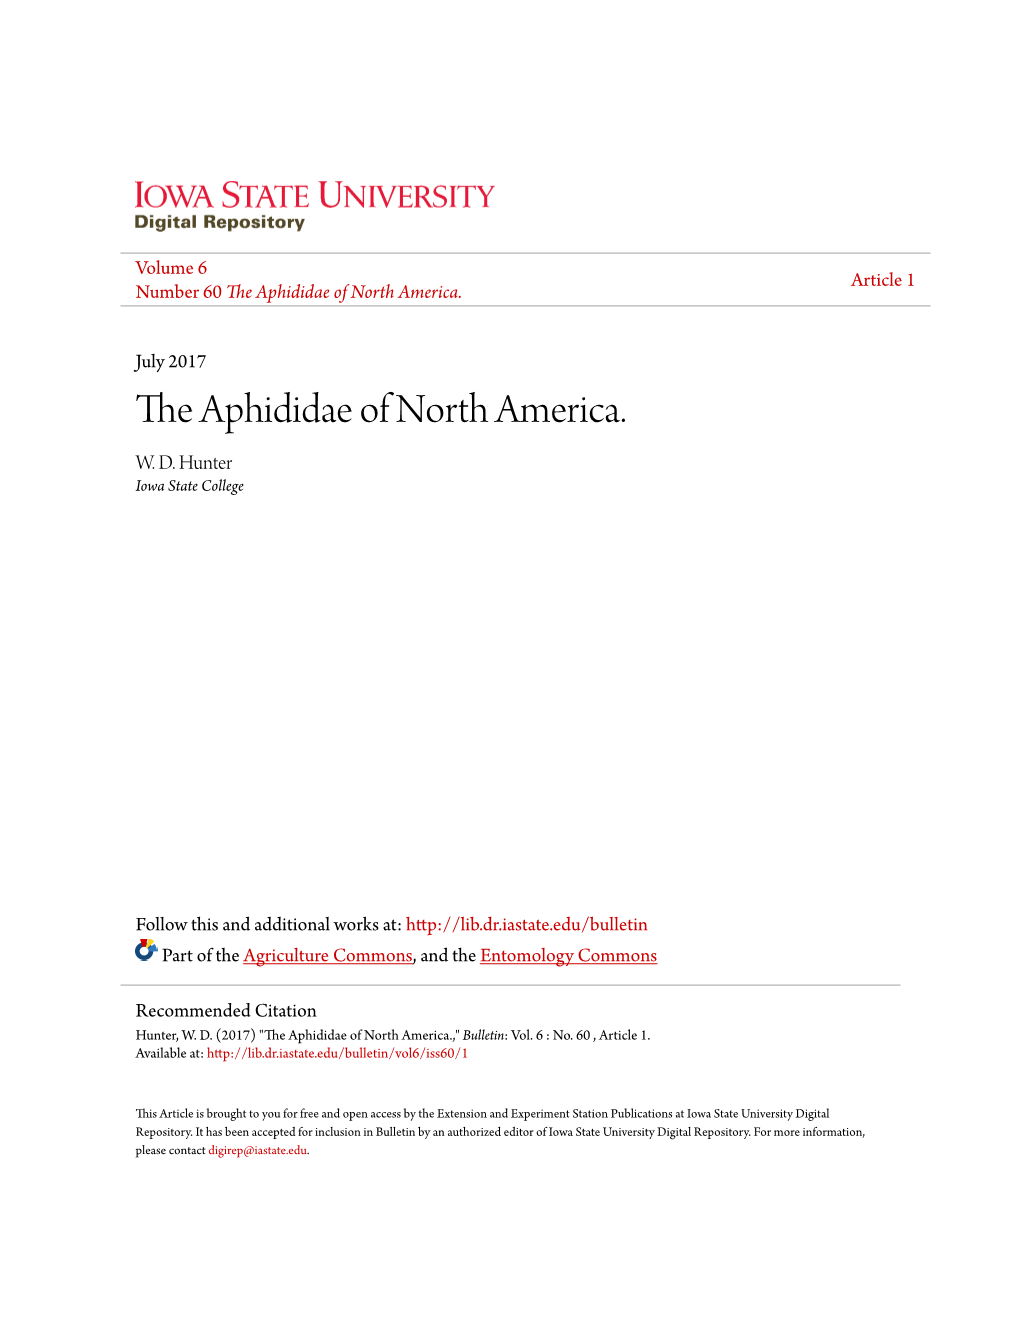 The Aphididae of North America